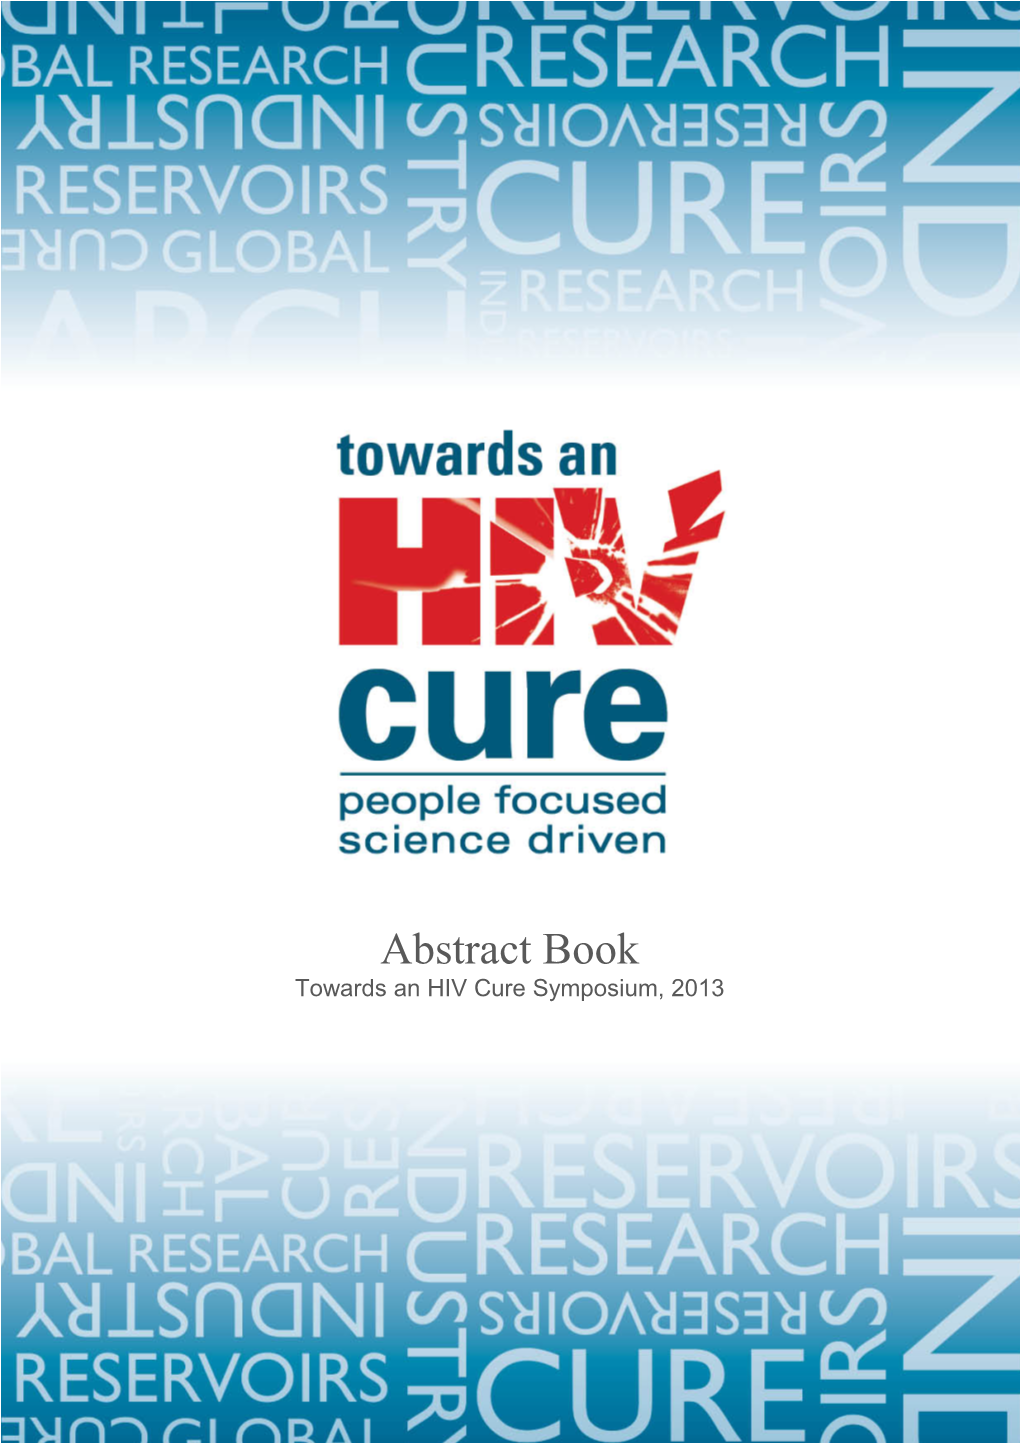 Abstract Book Towards an HIV Cure Symposium, 2013 Towards an HIV Cure Symposium 2013 Abstract Book 2